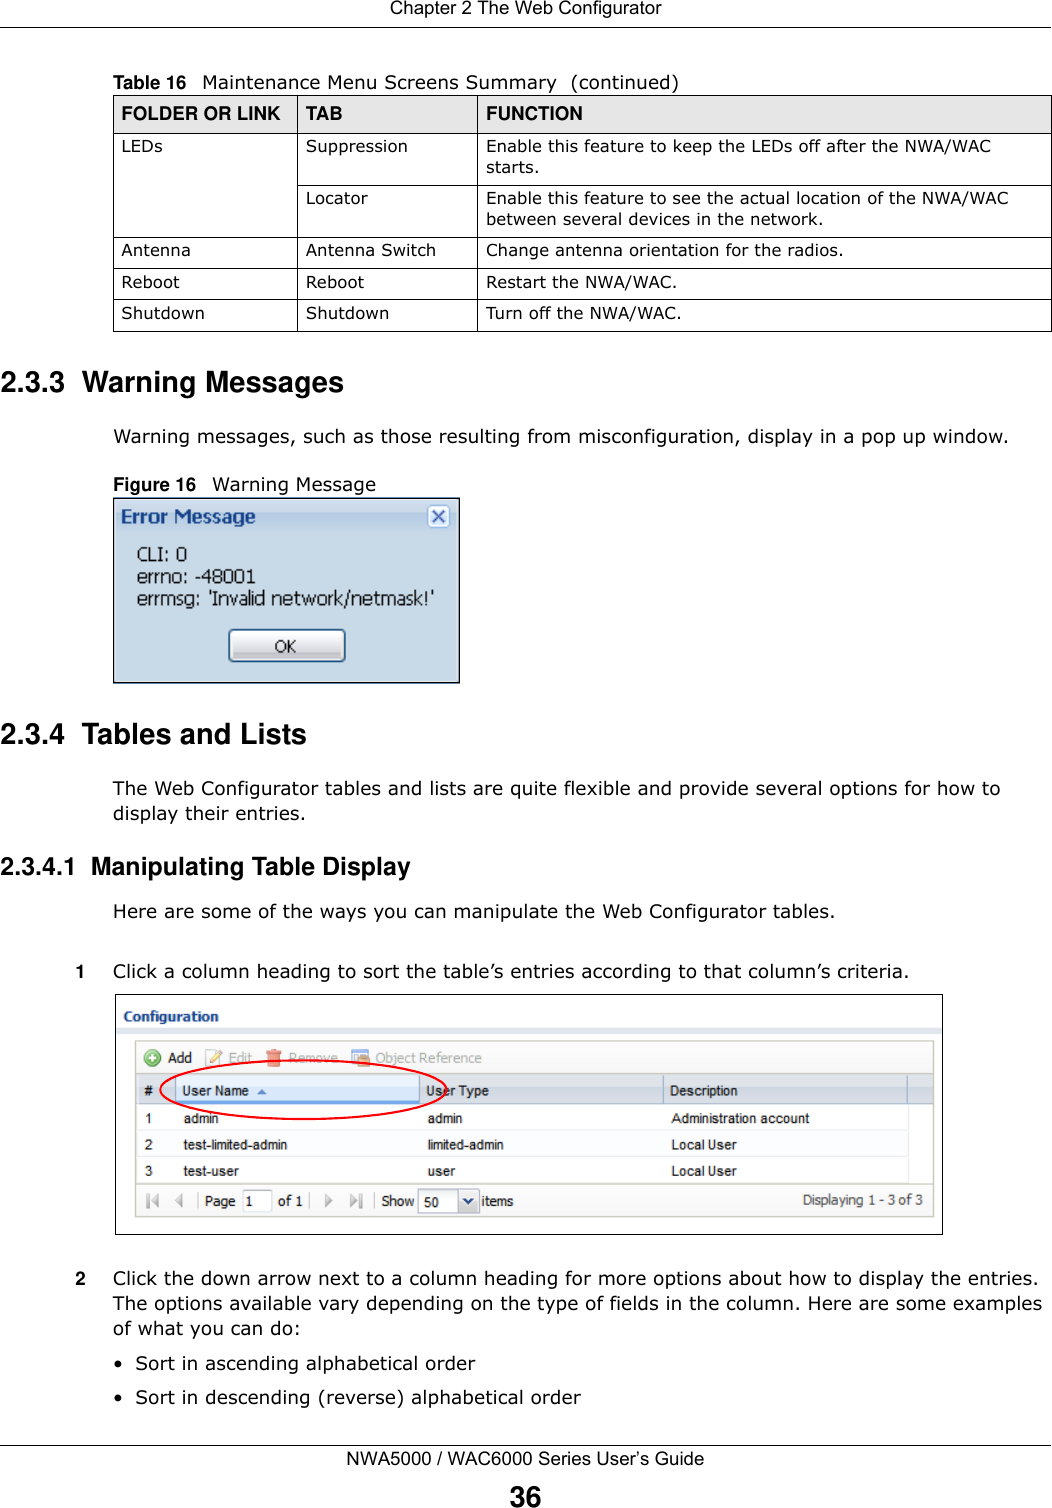 Chapter 2 The Web ConfiguratorNWA5000 / WAC6000 Series User’s Guide362.3.3  Warning MessagesWarning messages, such as those resulting from misconfiguration, display in a pop up window.Figure 16   Warning Message 2.3.4  Tables and ListsThe Web Configurator tables and lists are quite flexible and provide several options for how to display their entries.2.3.4.1  Manipulating Table DisplayHere are some of the ways you can manipulate the Web Configurator tables.1Click a column heading to sort the table’s entries according to that column’s criteria. 2Click the down arrow next to a column heading for more options about how to display the entries. The options available vary depending on the type of fields in the column. Here are some examples of what you can do:• Sort in ascending alphabetical order• Sort in descending (reverse) alphabetical orderLEDs Suppression Enable this feature to keep the LEDs off after the NWA/WAC starts.Locator Enable this feature to see the actual location of the NWA/WAC between several devices in the network.Antenna Antenna Switch Change antenna orientation for the radios.Reboot Reboot Restart the NWA/WAC.Shutdown Shutdown Turn off the NWA/WAC.Table 16   Maintenance Menu Screens Summary  (continued)FOLDER OR LINK TAB FUNCTION